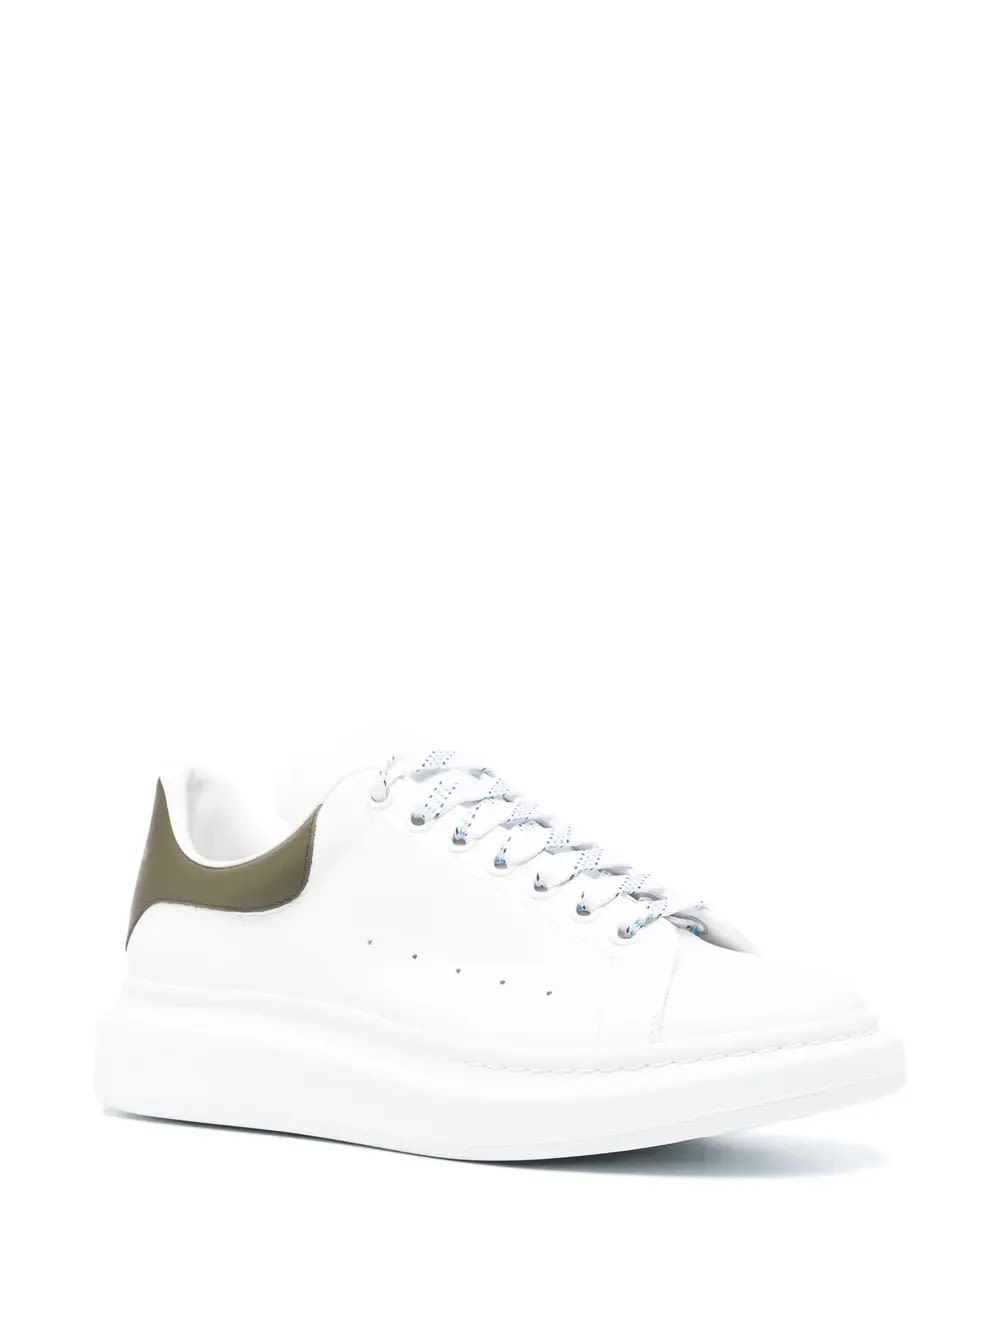 Shop Alexander Mcqueen Oversized Sneakers In White And Khaki Green